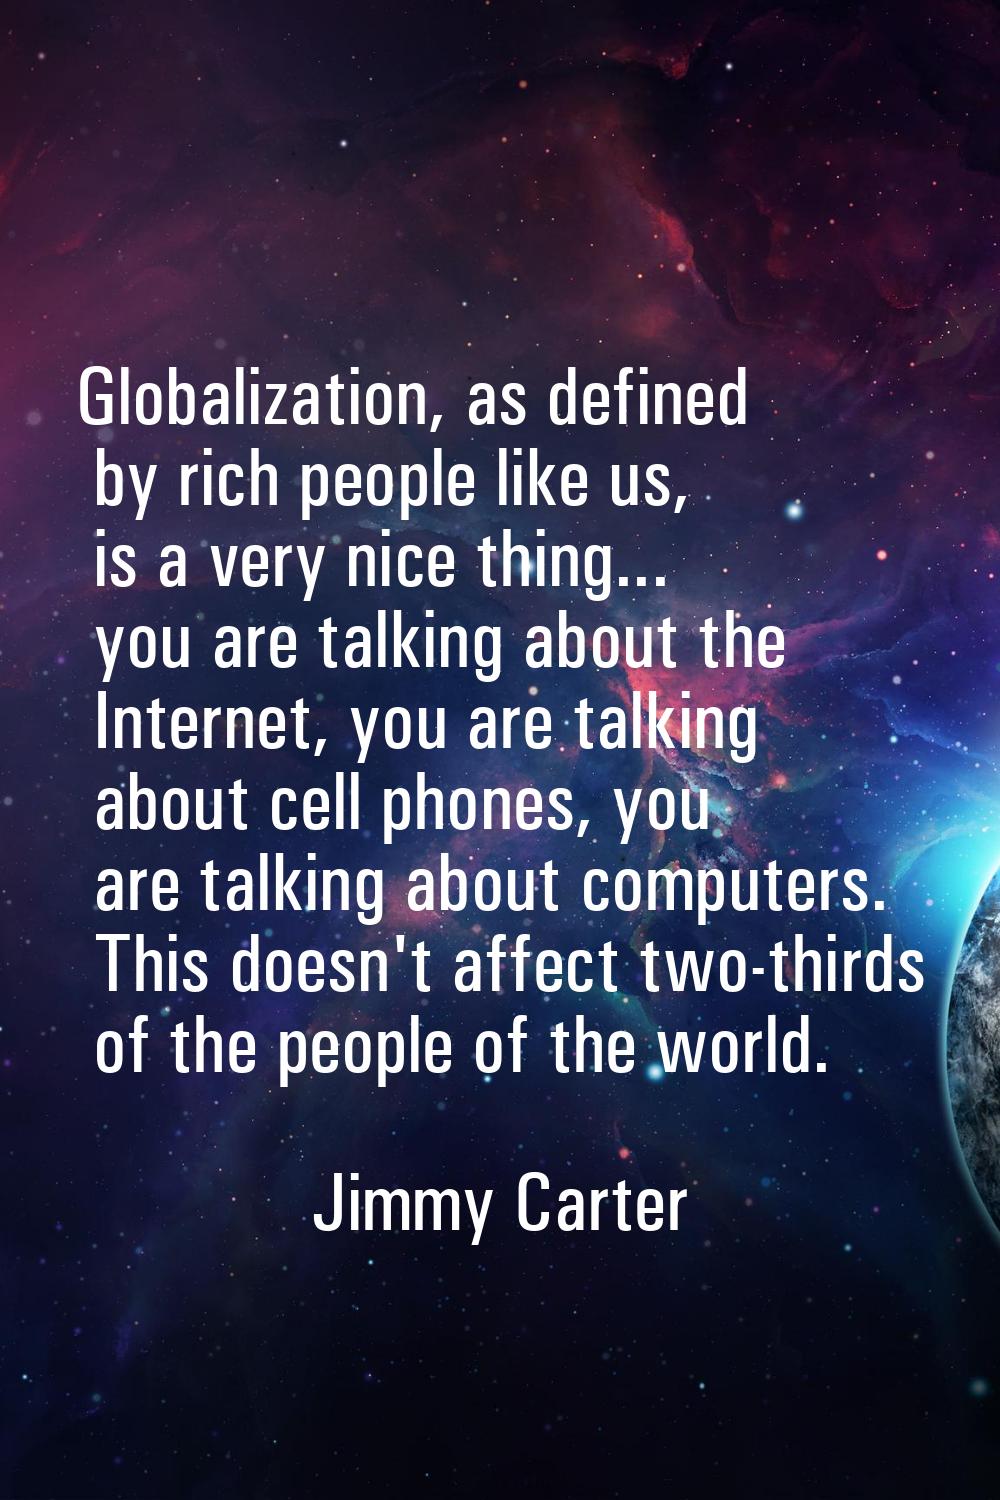 Globalization, as defined by rich people like us, is a very nice thing... you are talking about the